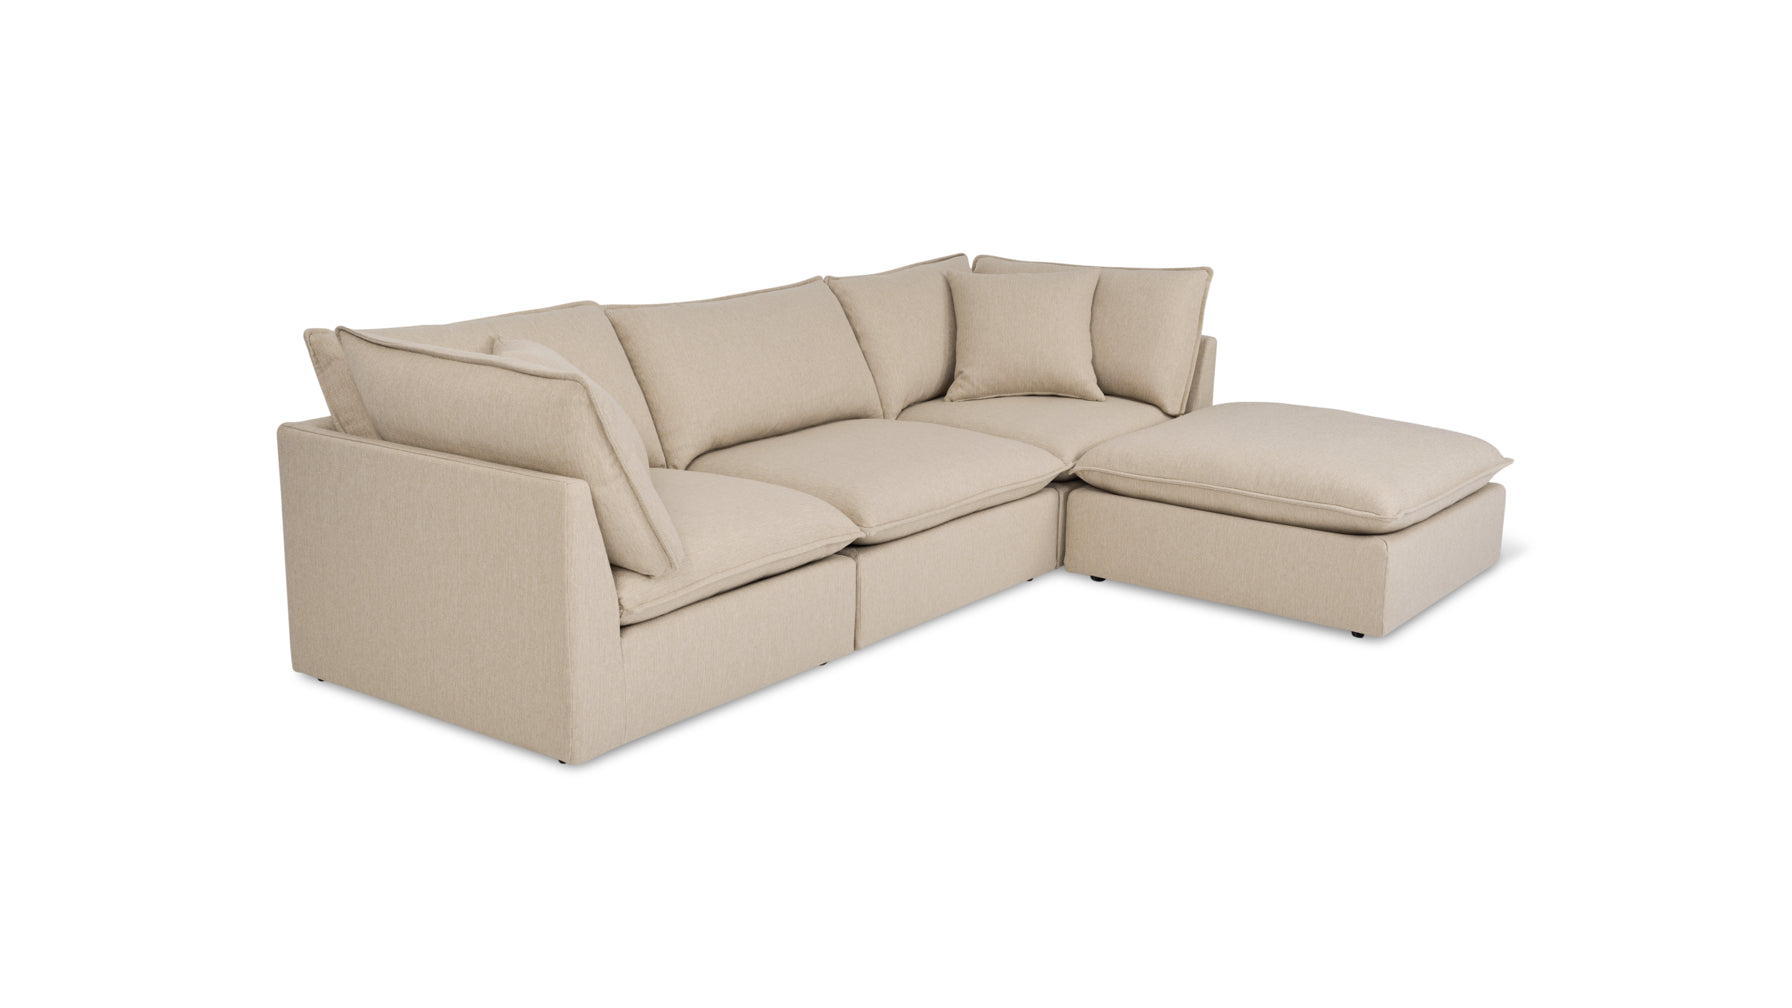 Chill Time 4-Piece Modular Sectional, Biscuit - Image 2